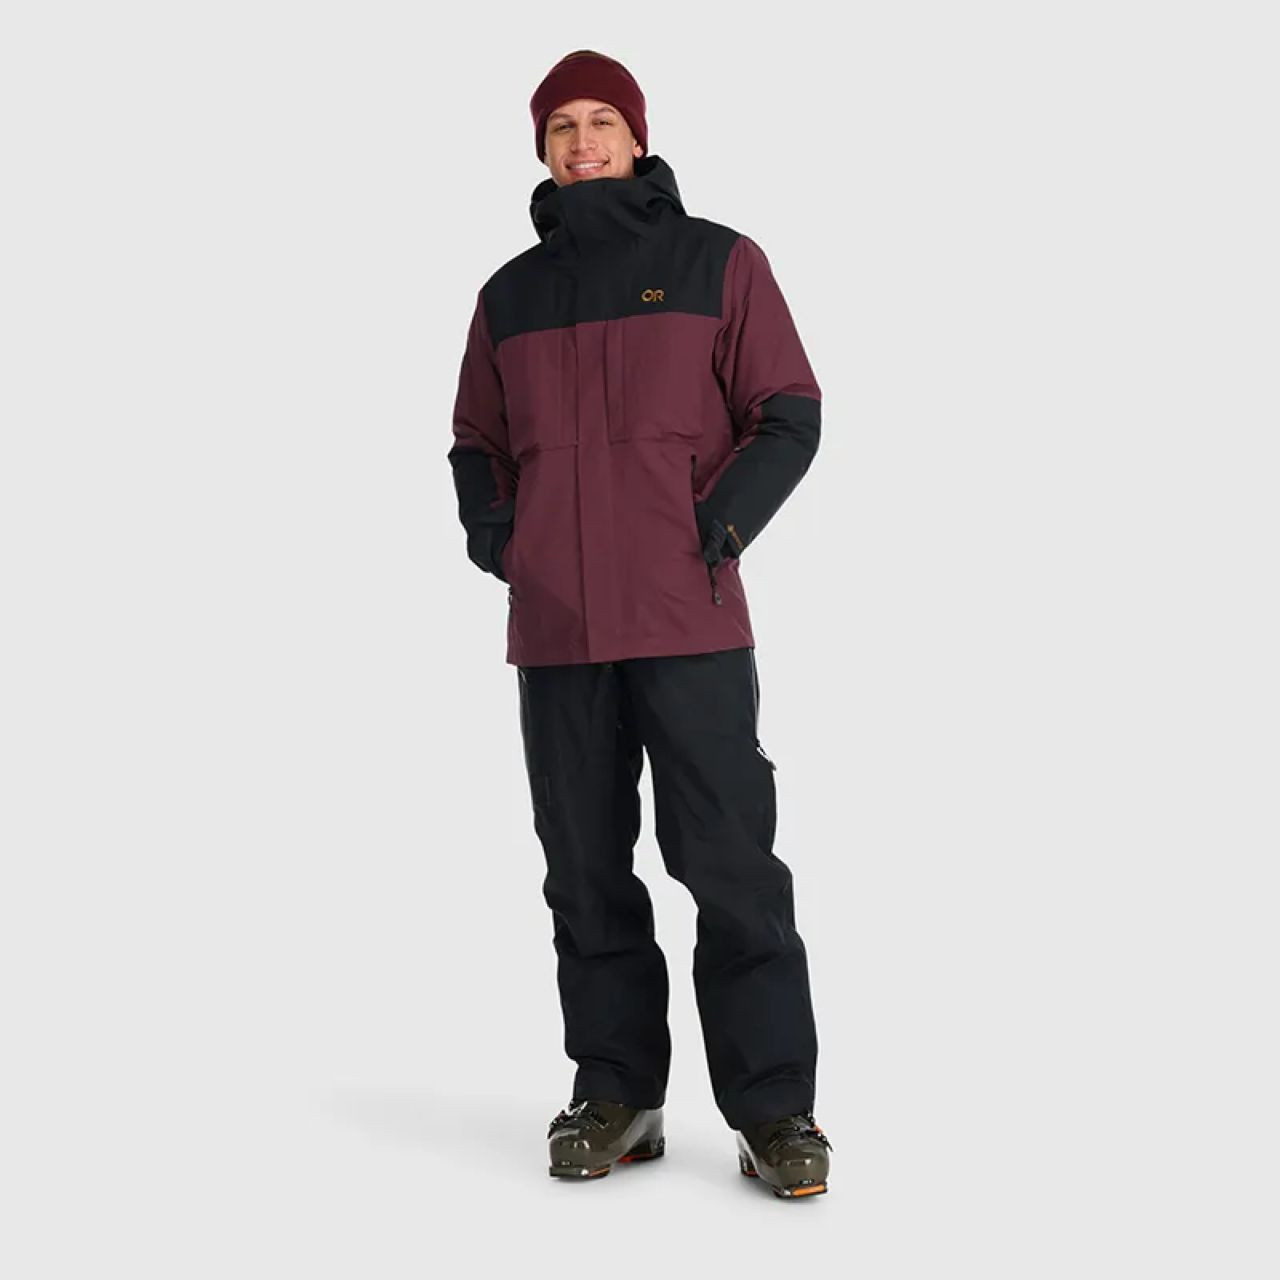 Outdoor Research Kulshan Storm Jacket - Men's | Snowsports Jackets